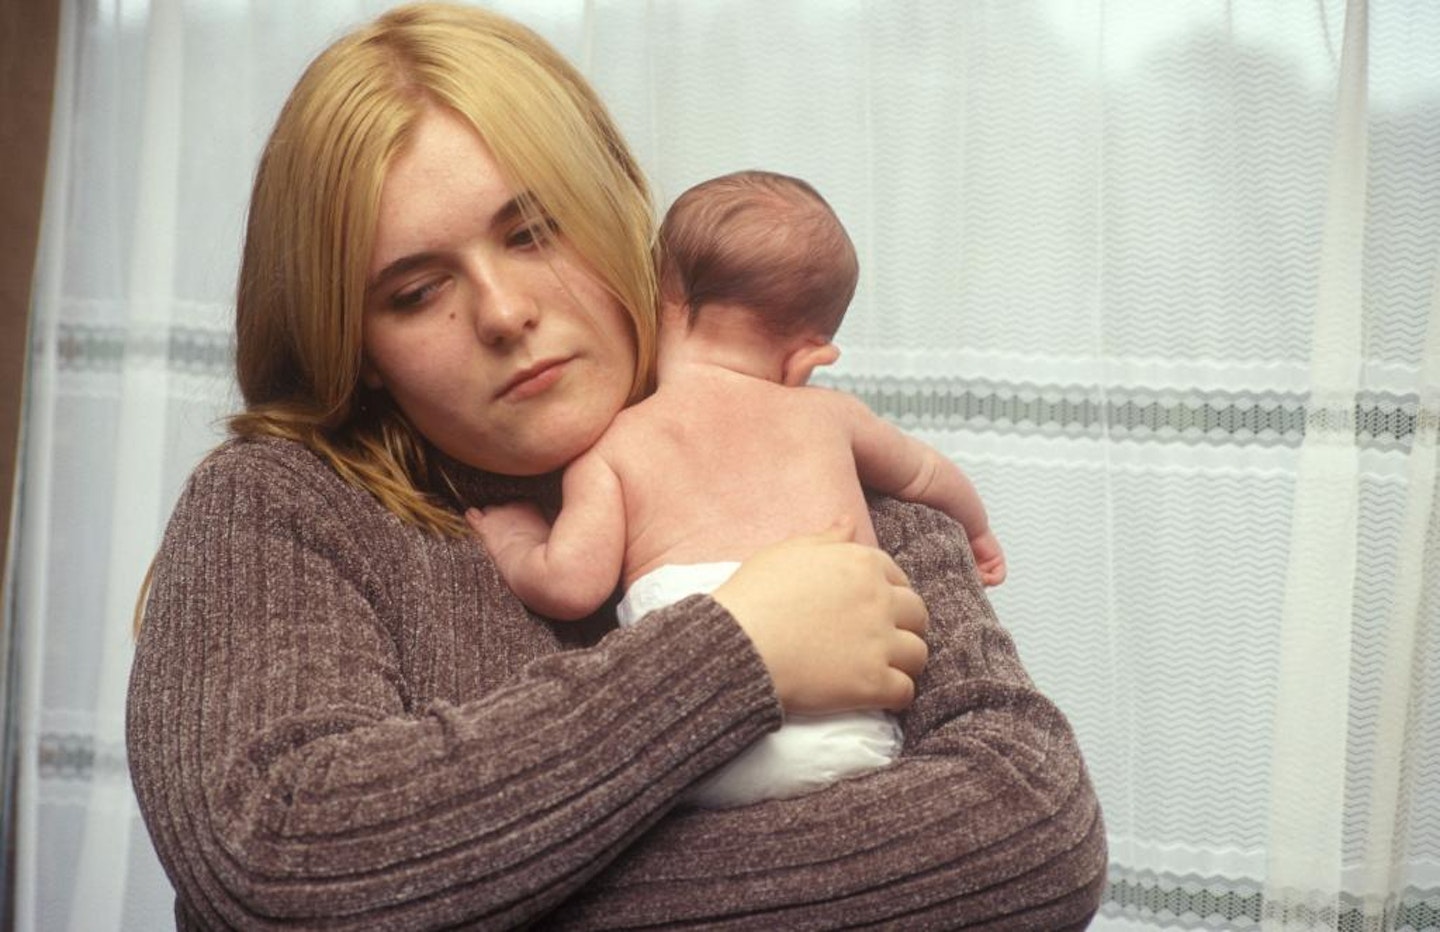 overweight-women-swedish-study-pregnant-babies-cerebral-palsy-obese